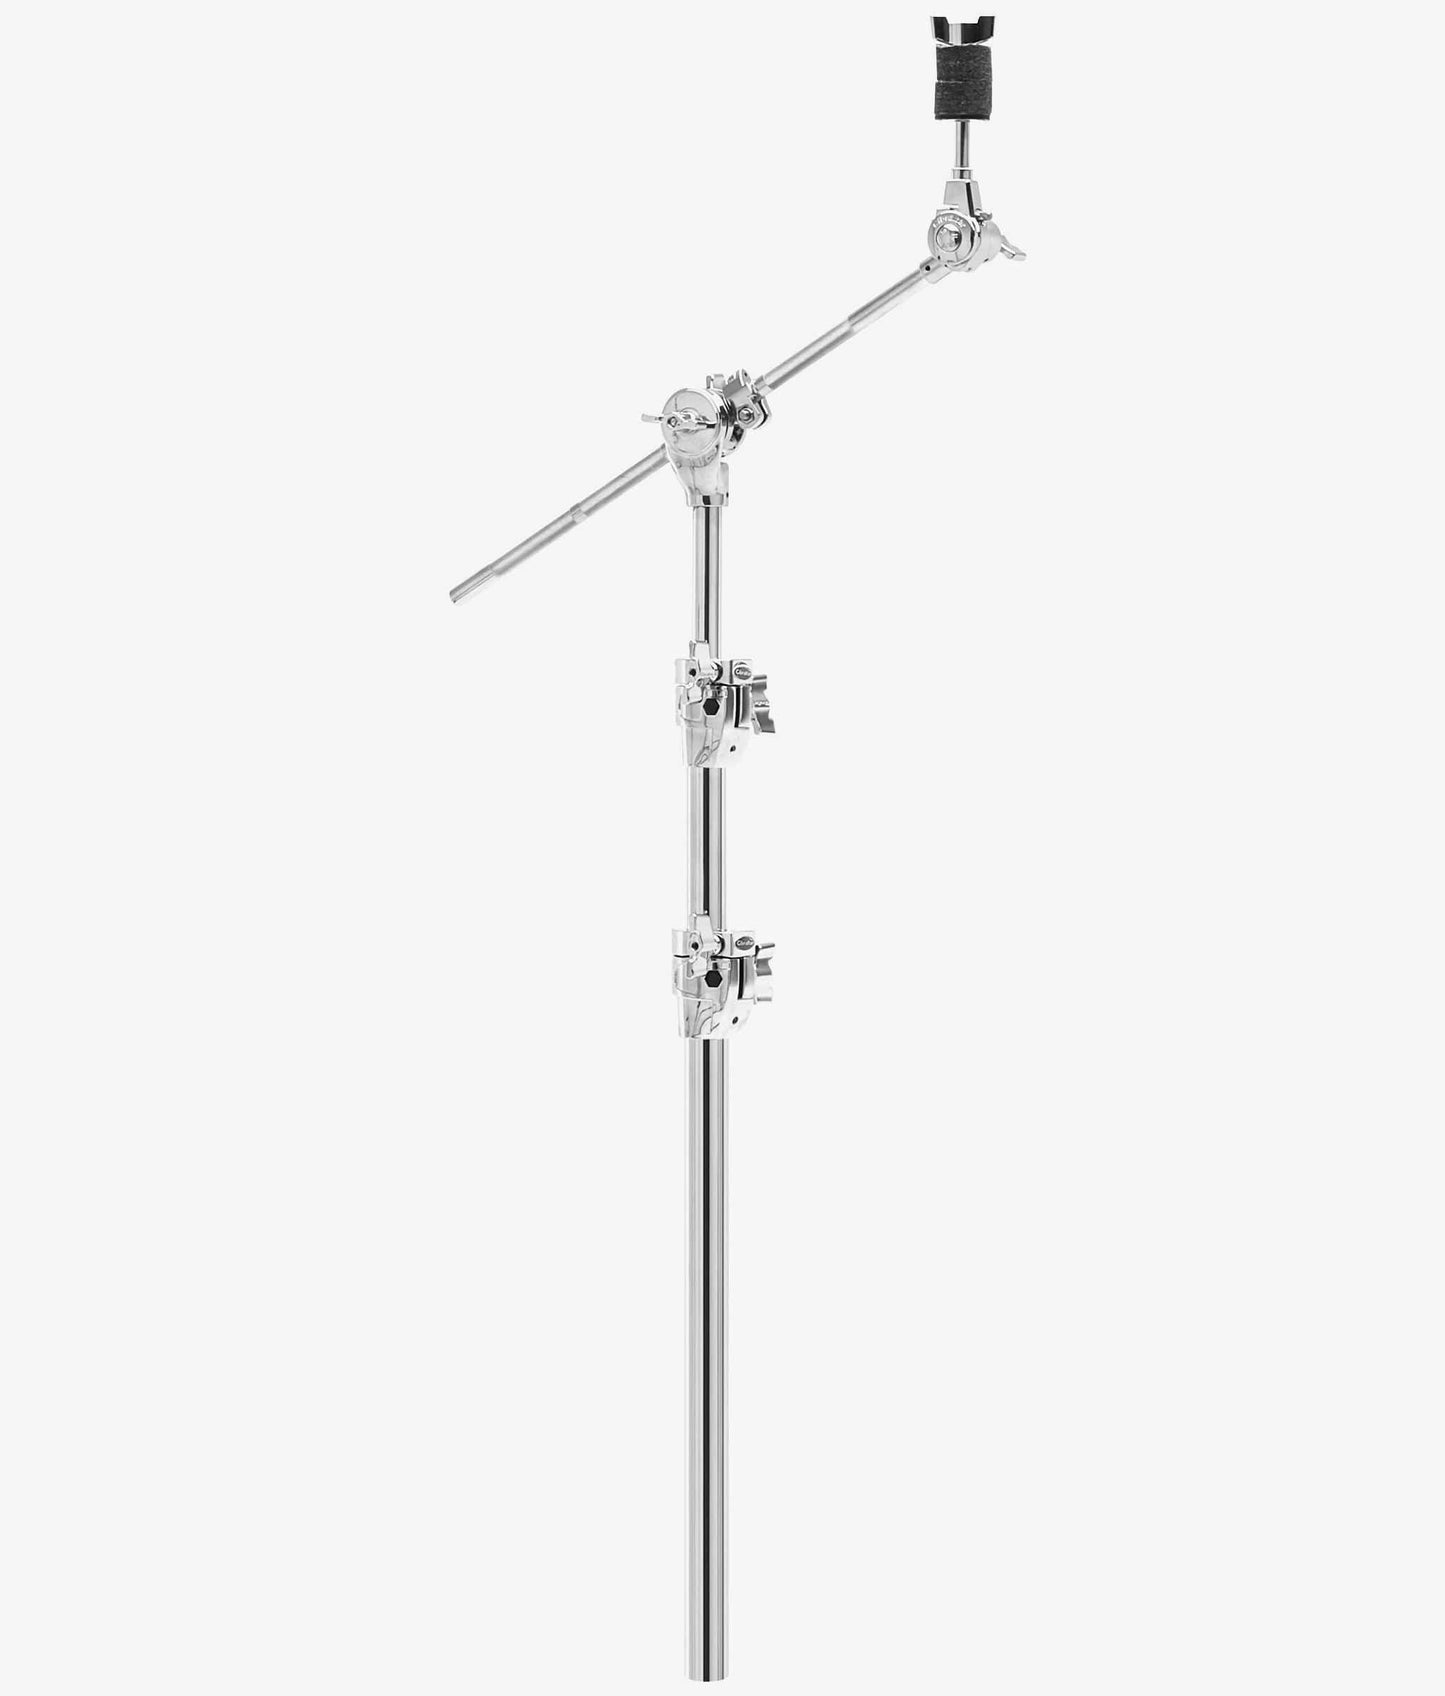  Gibraltar 6709NL No Leg Cymbal Stand cymbal boom stand